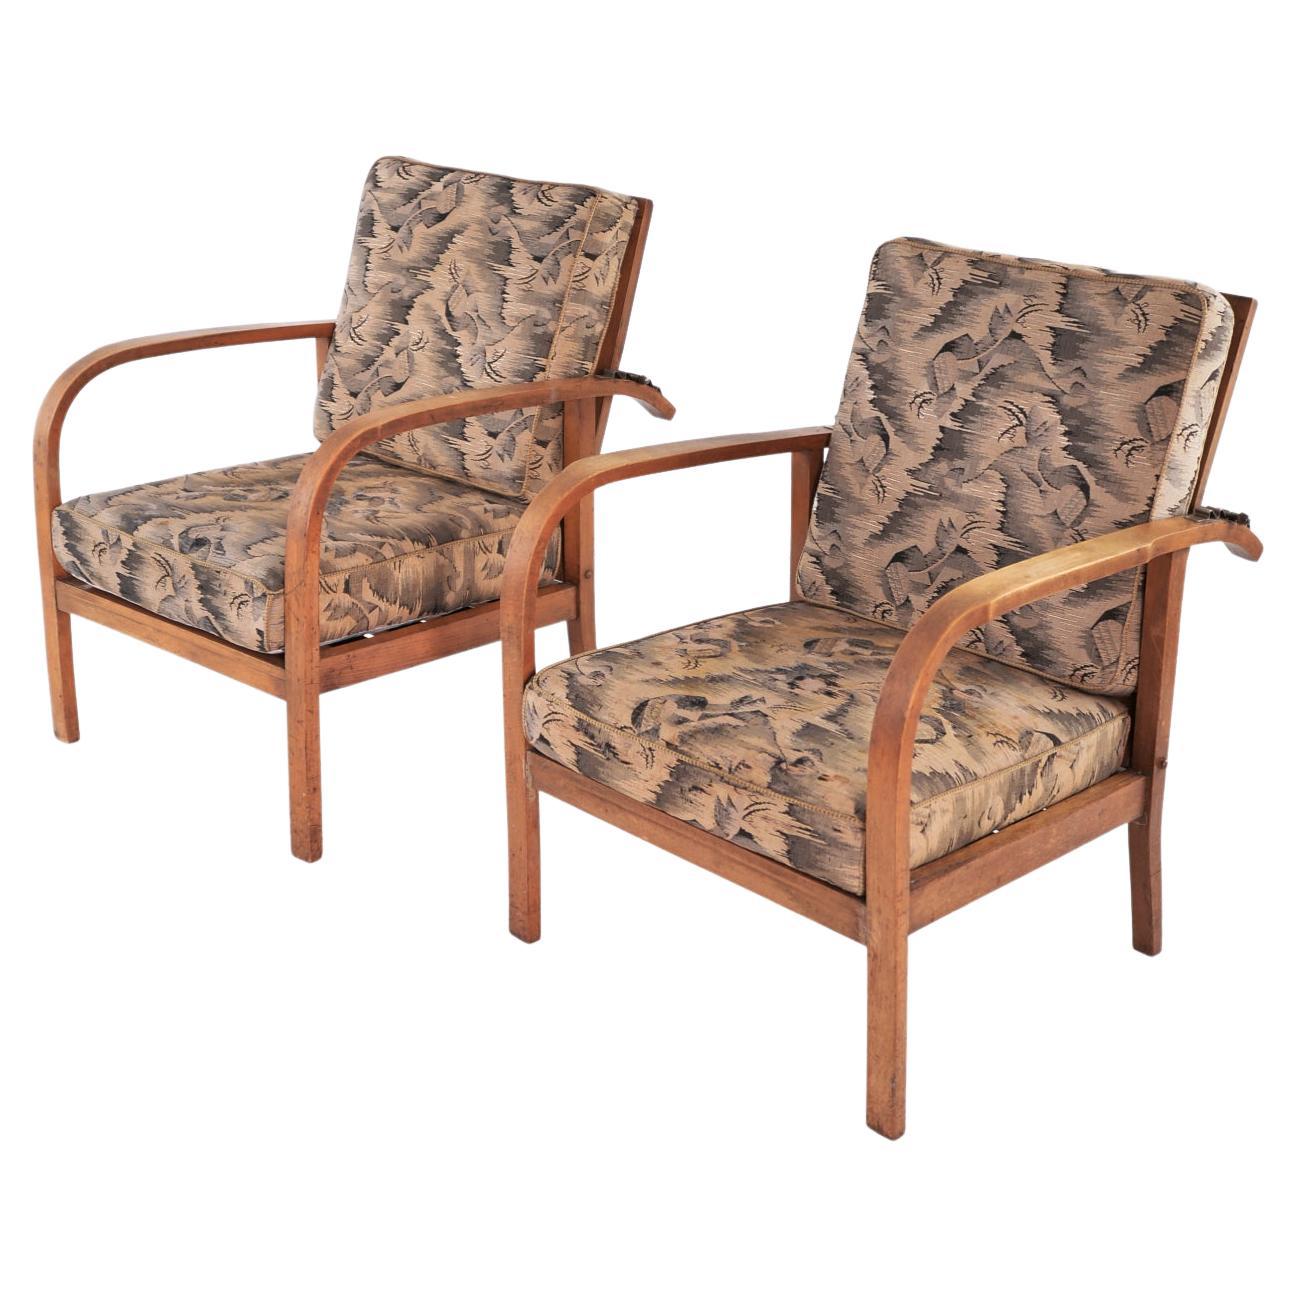 Pair of Modernist Wooden Armchairs by Jan Vaněk, Original Upholstery, circa 1935 For Sale